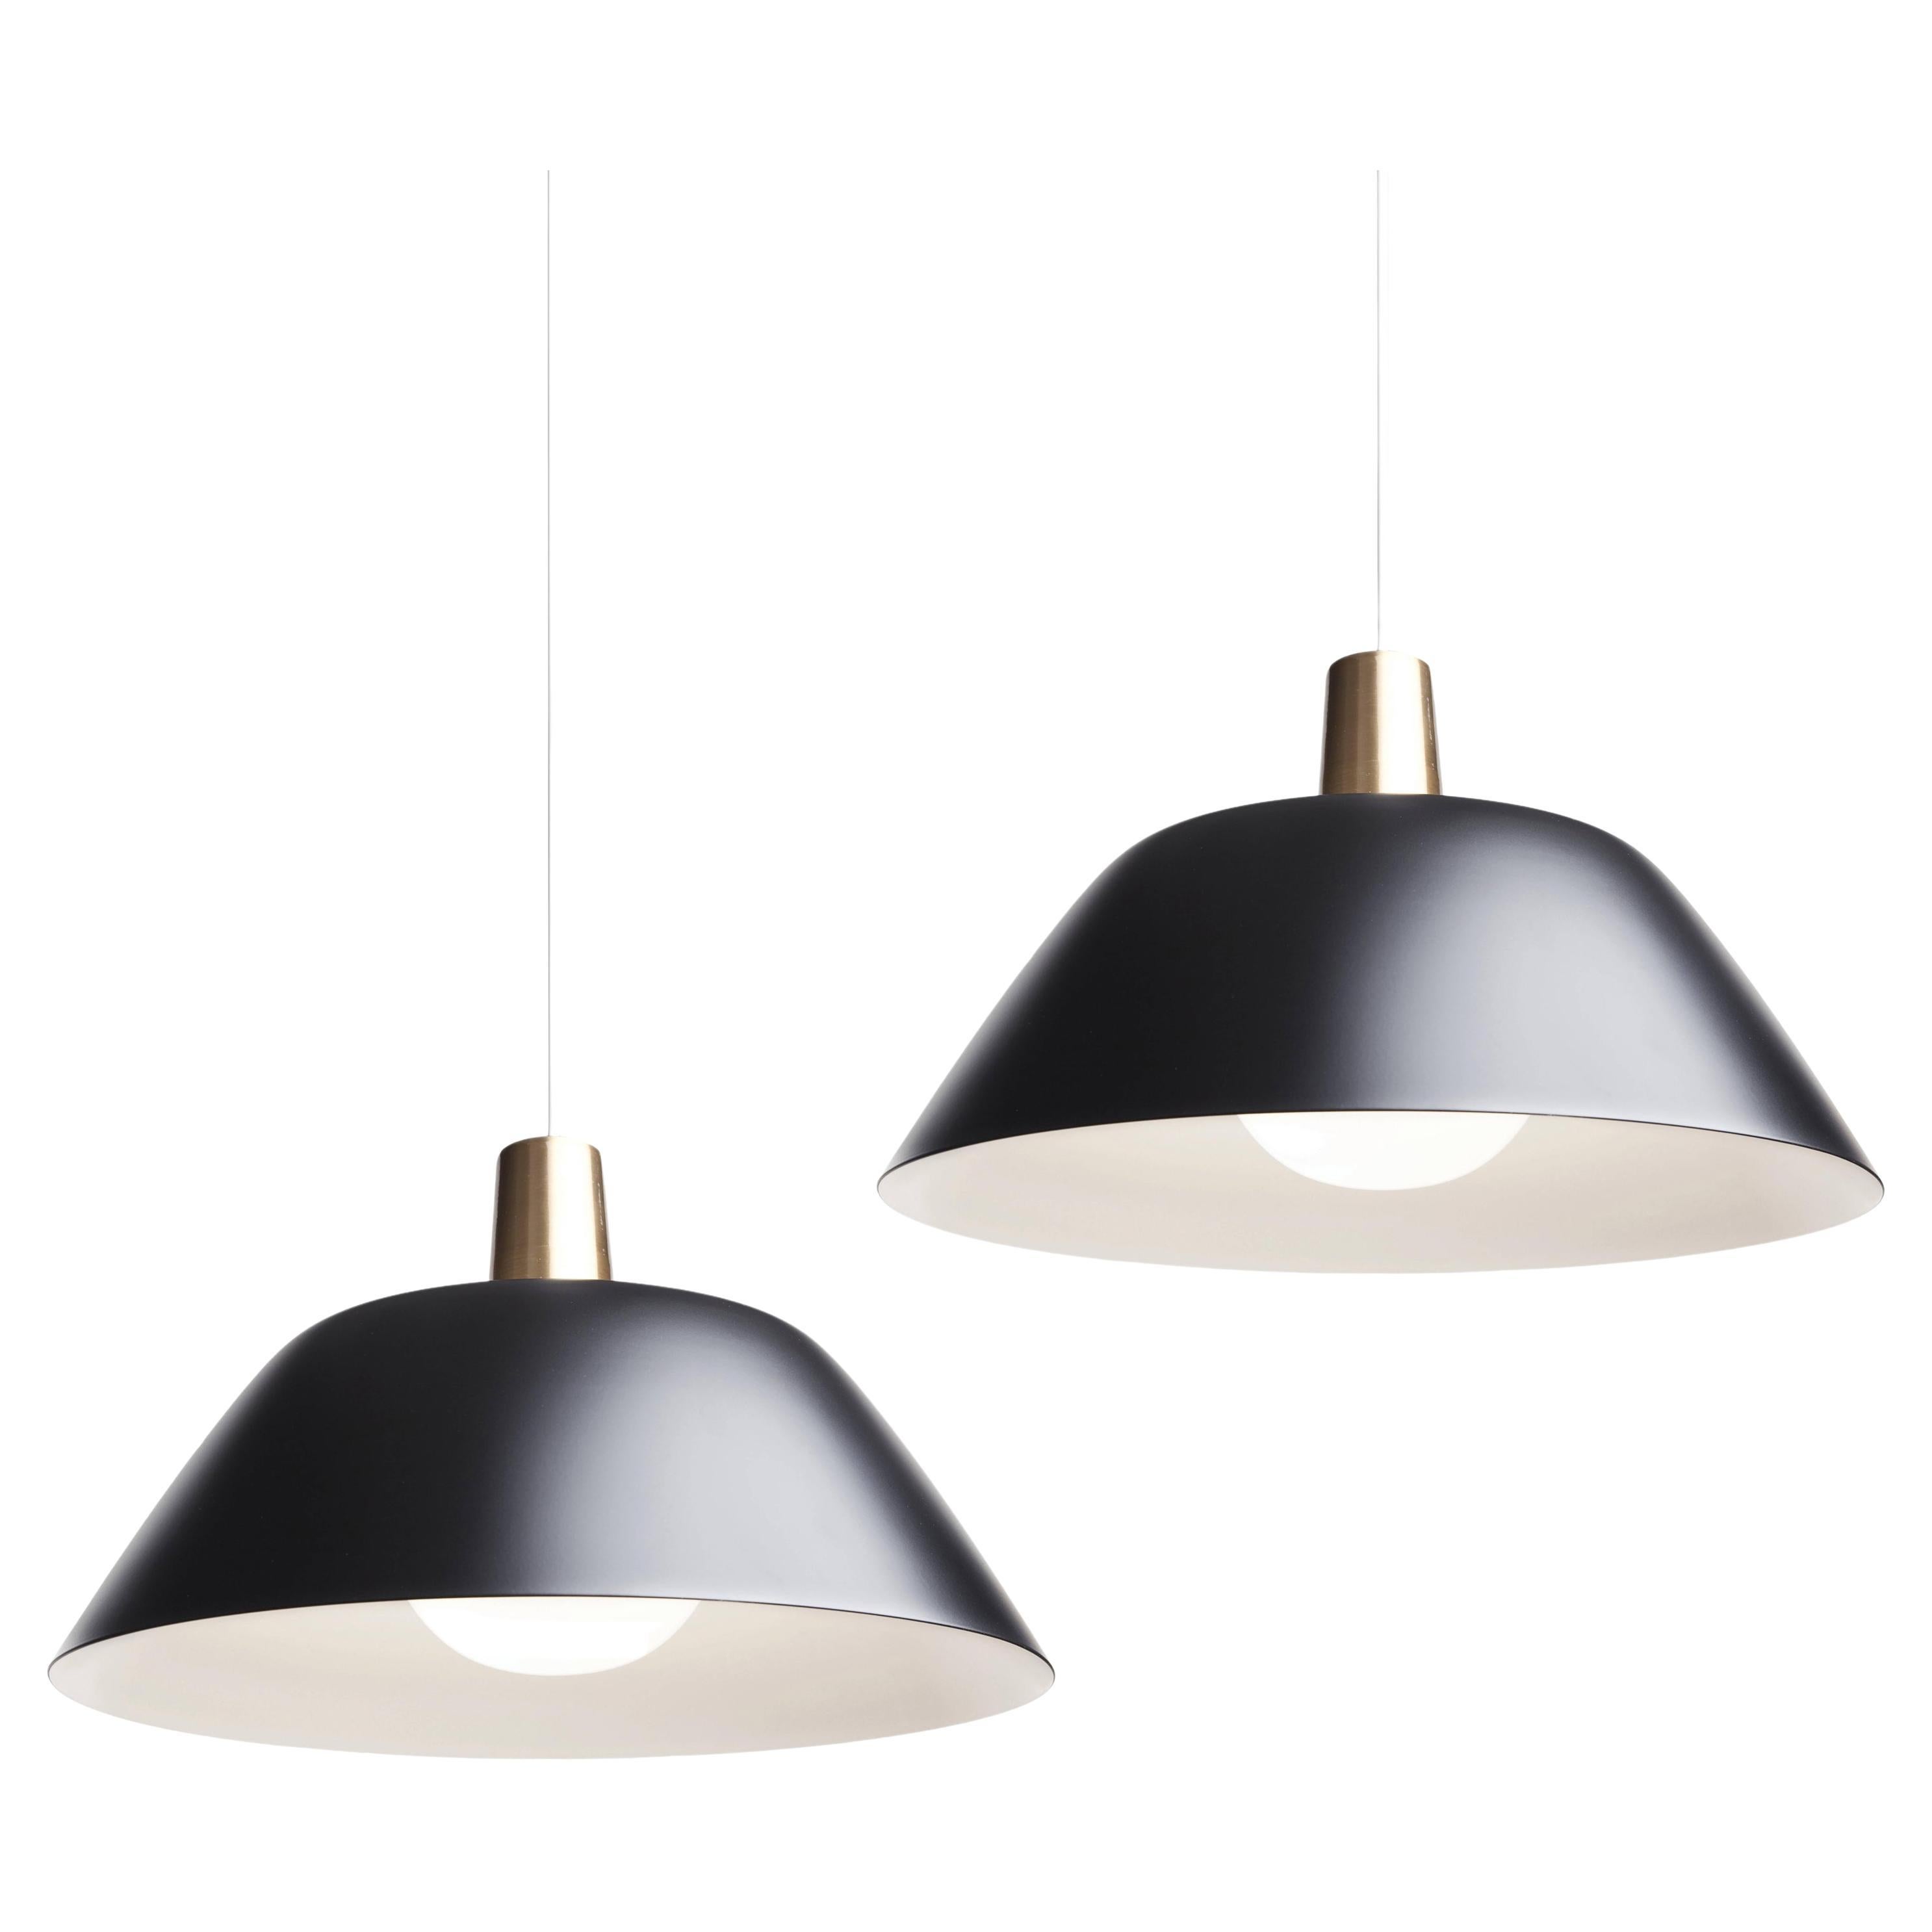 Pair of Lisa Johansson-Pape 'Ihanne' Pendant Lamps for Innolux Oy in Black For Sale